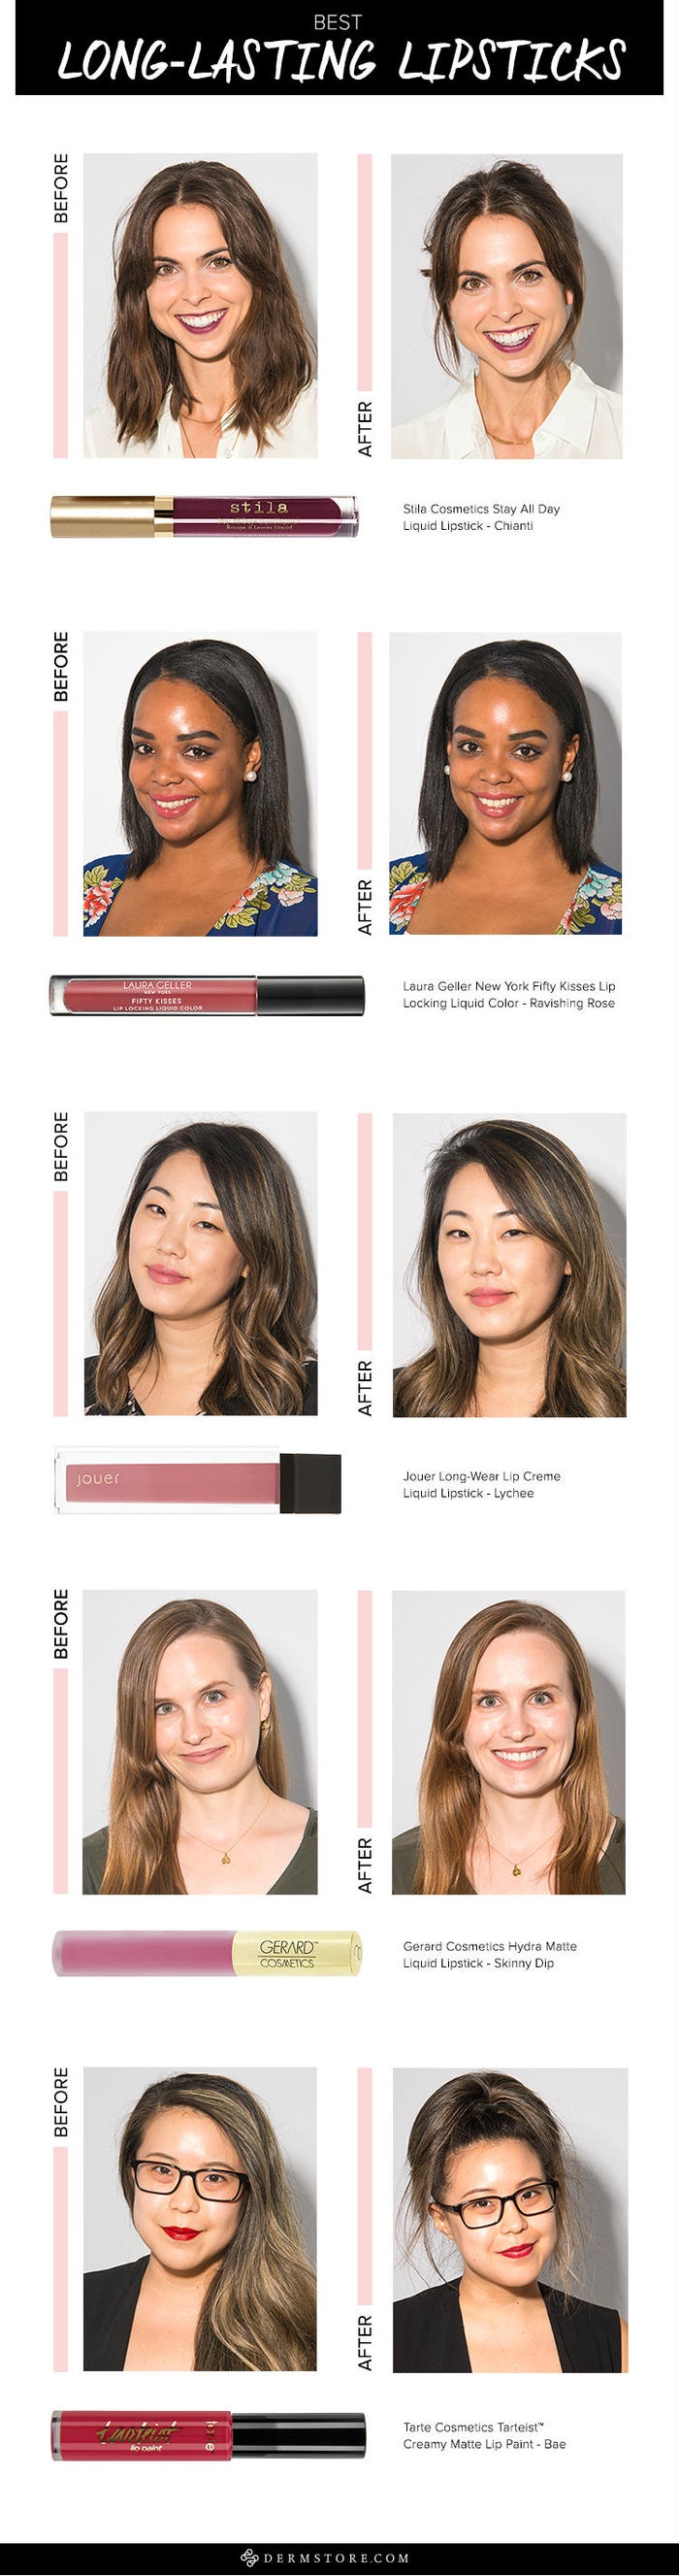 long lasting lipsticks before and after photos 